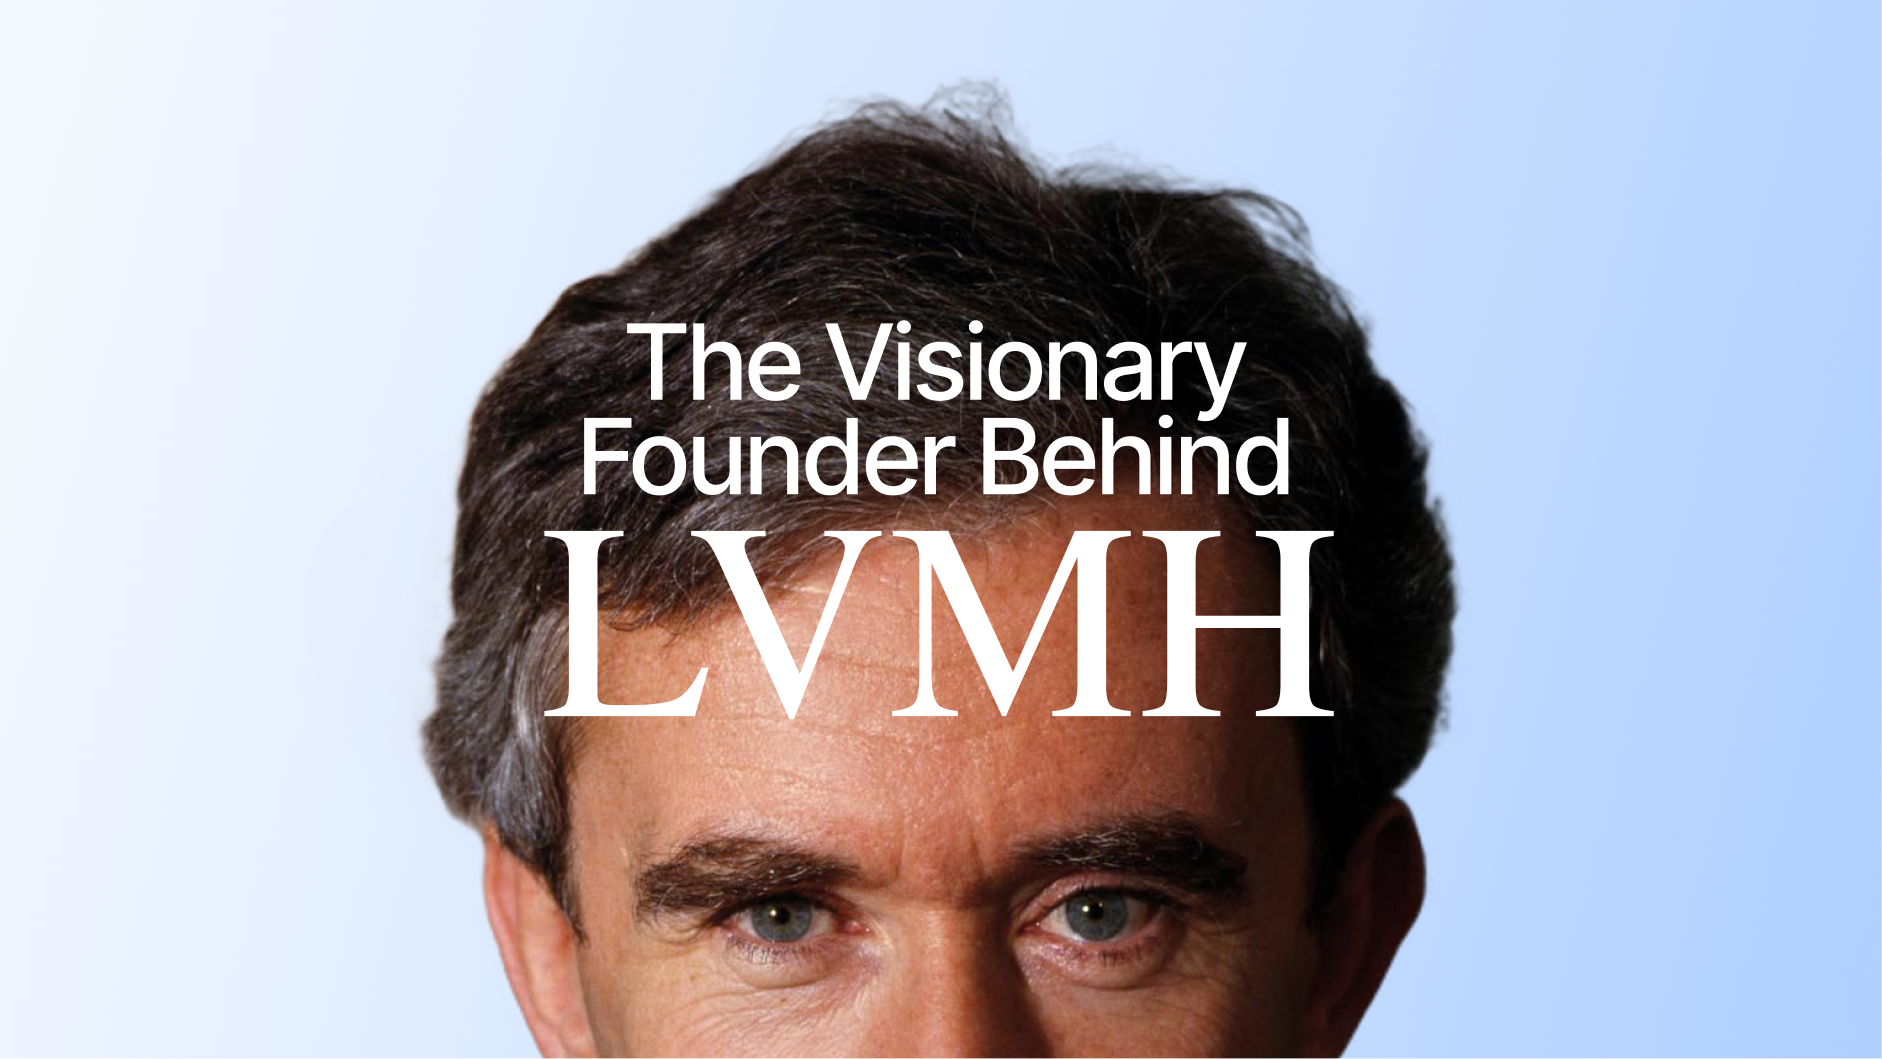 The Luxury Empire: LVMH's Most Notable Acquisitions Since